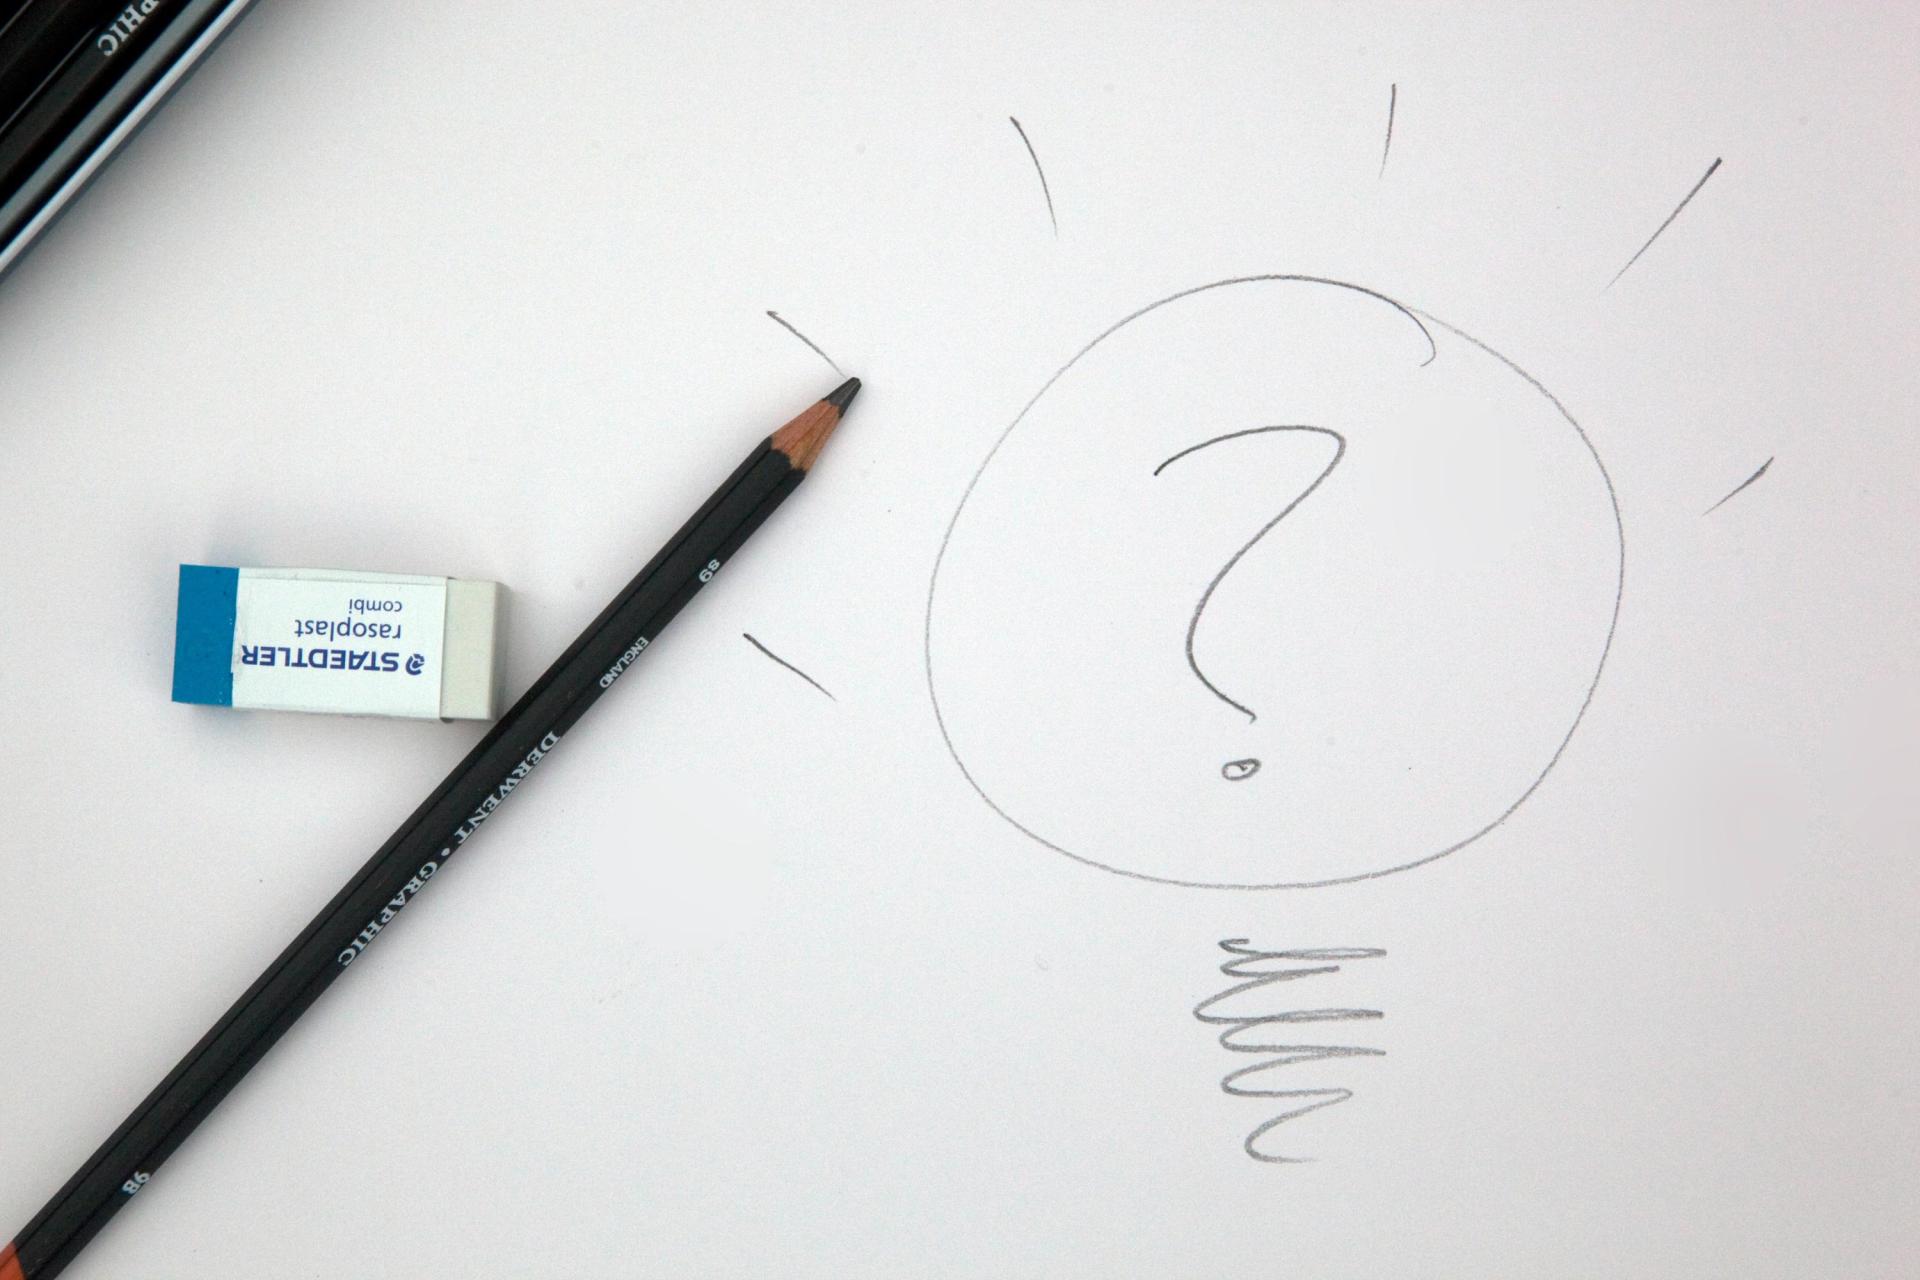 Lightbulb with question mark in the middle drawn on white paper with a pencil and rubber beside it